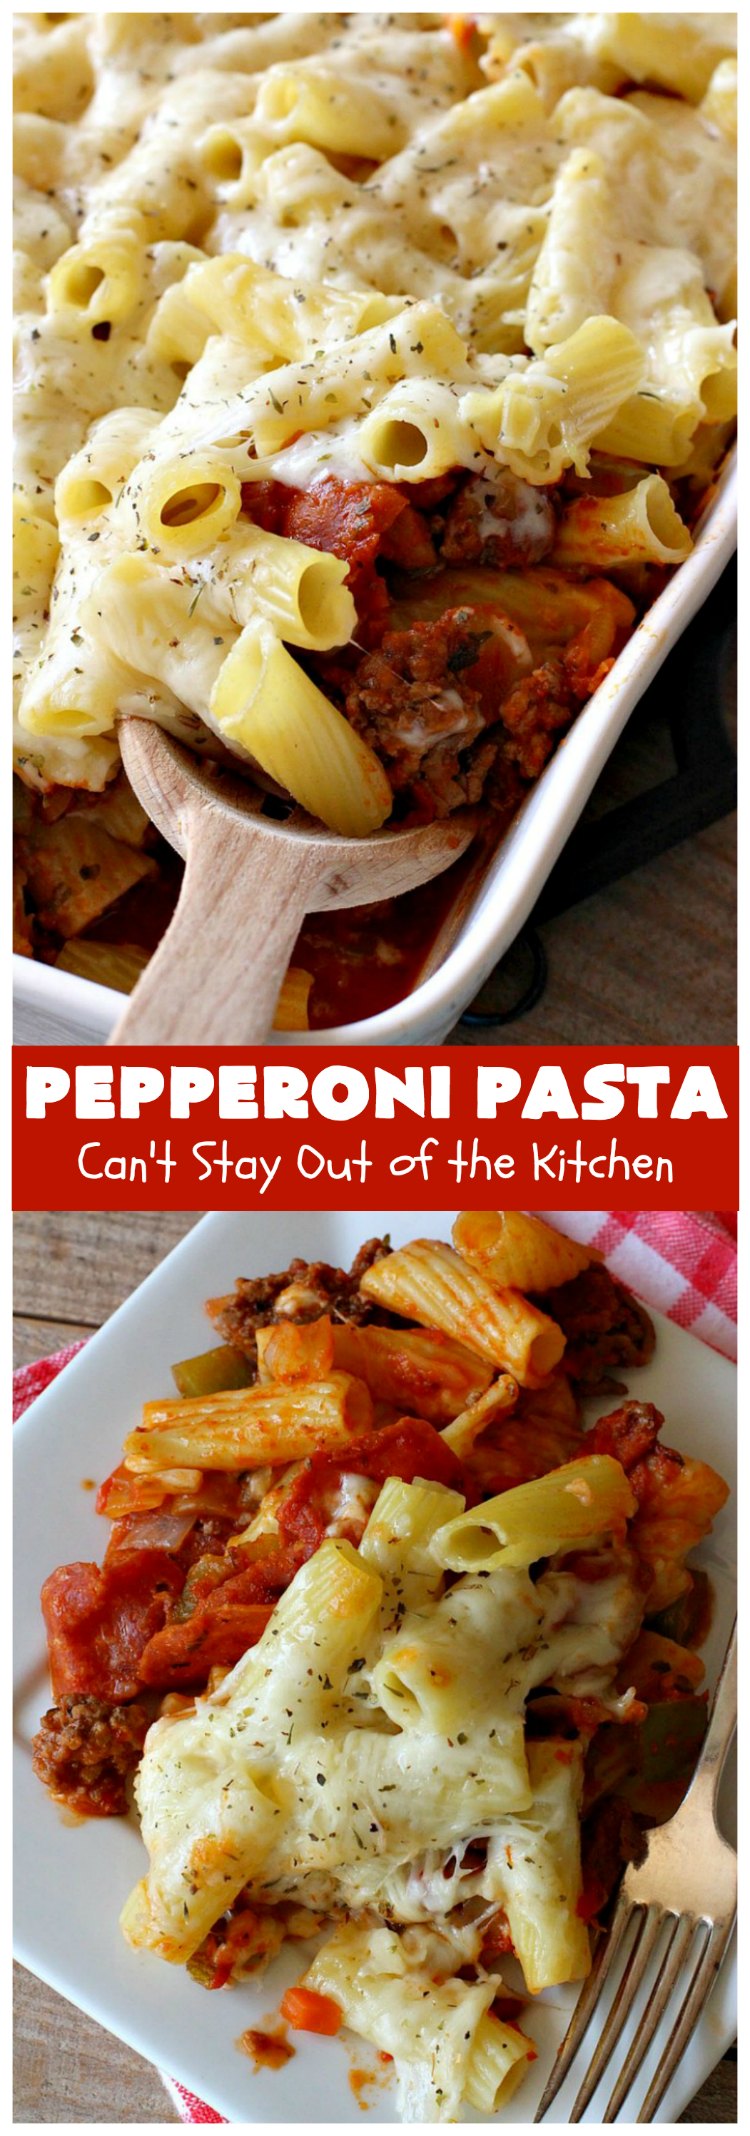 Pepperoni Pasta | Can't Stay Out of the Kitchen | easy layered #Italian #pasta dish. This one includes #pepperoni, #GroundBeef, #Parmesan, #mozzarella & #provolone cheeses. Great comfort food meal. #Rigatoni #PepperoniPasta